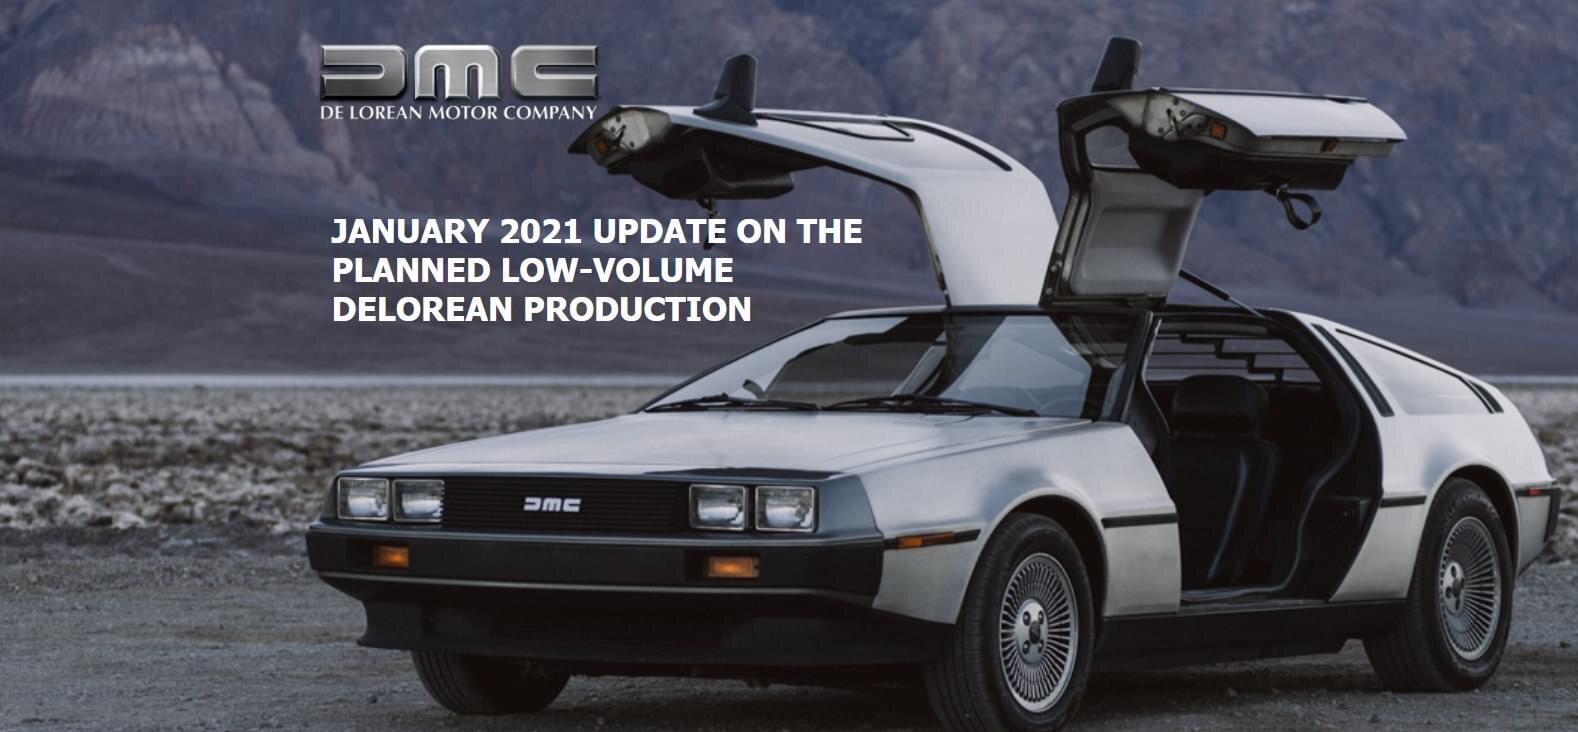 Nhtsa Ruling Paves The Way For A New Low Volume Delorean To